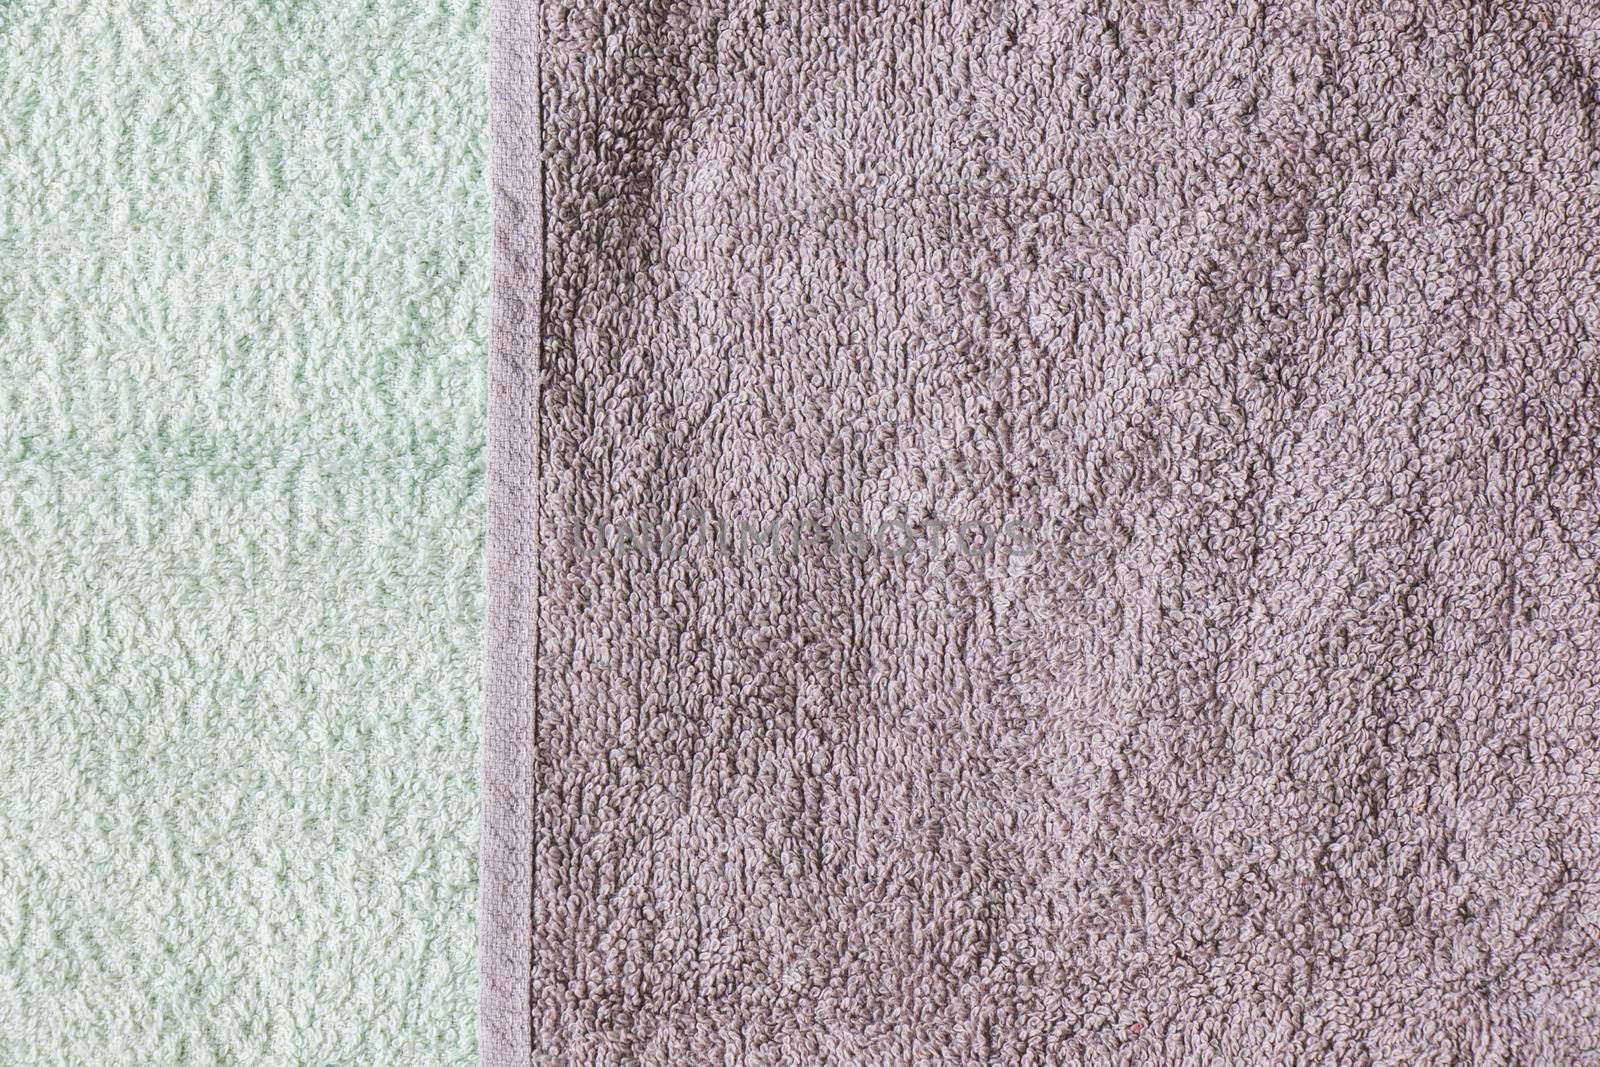 Towel texture and pattern background, high angle view